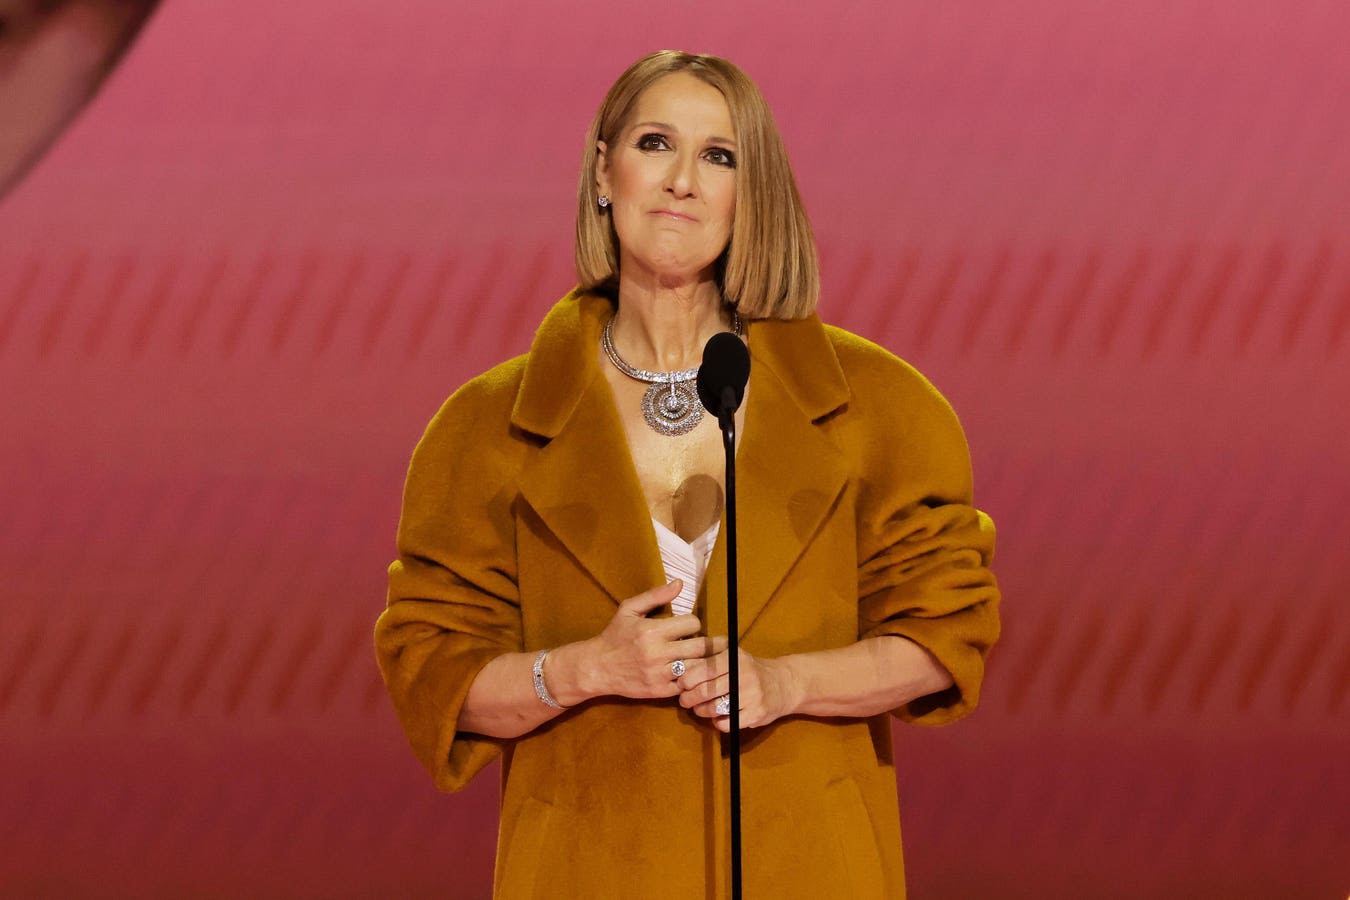 Celine Dion’s New Single Is On The Rise As One Of Her Biggest Albums Returns